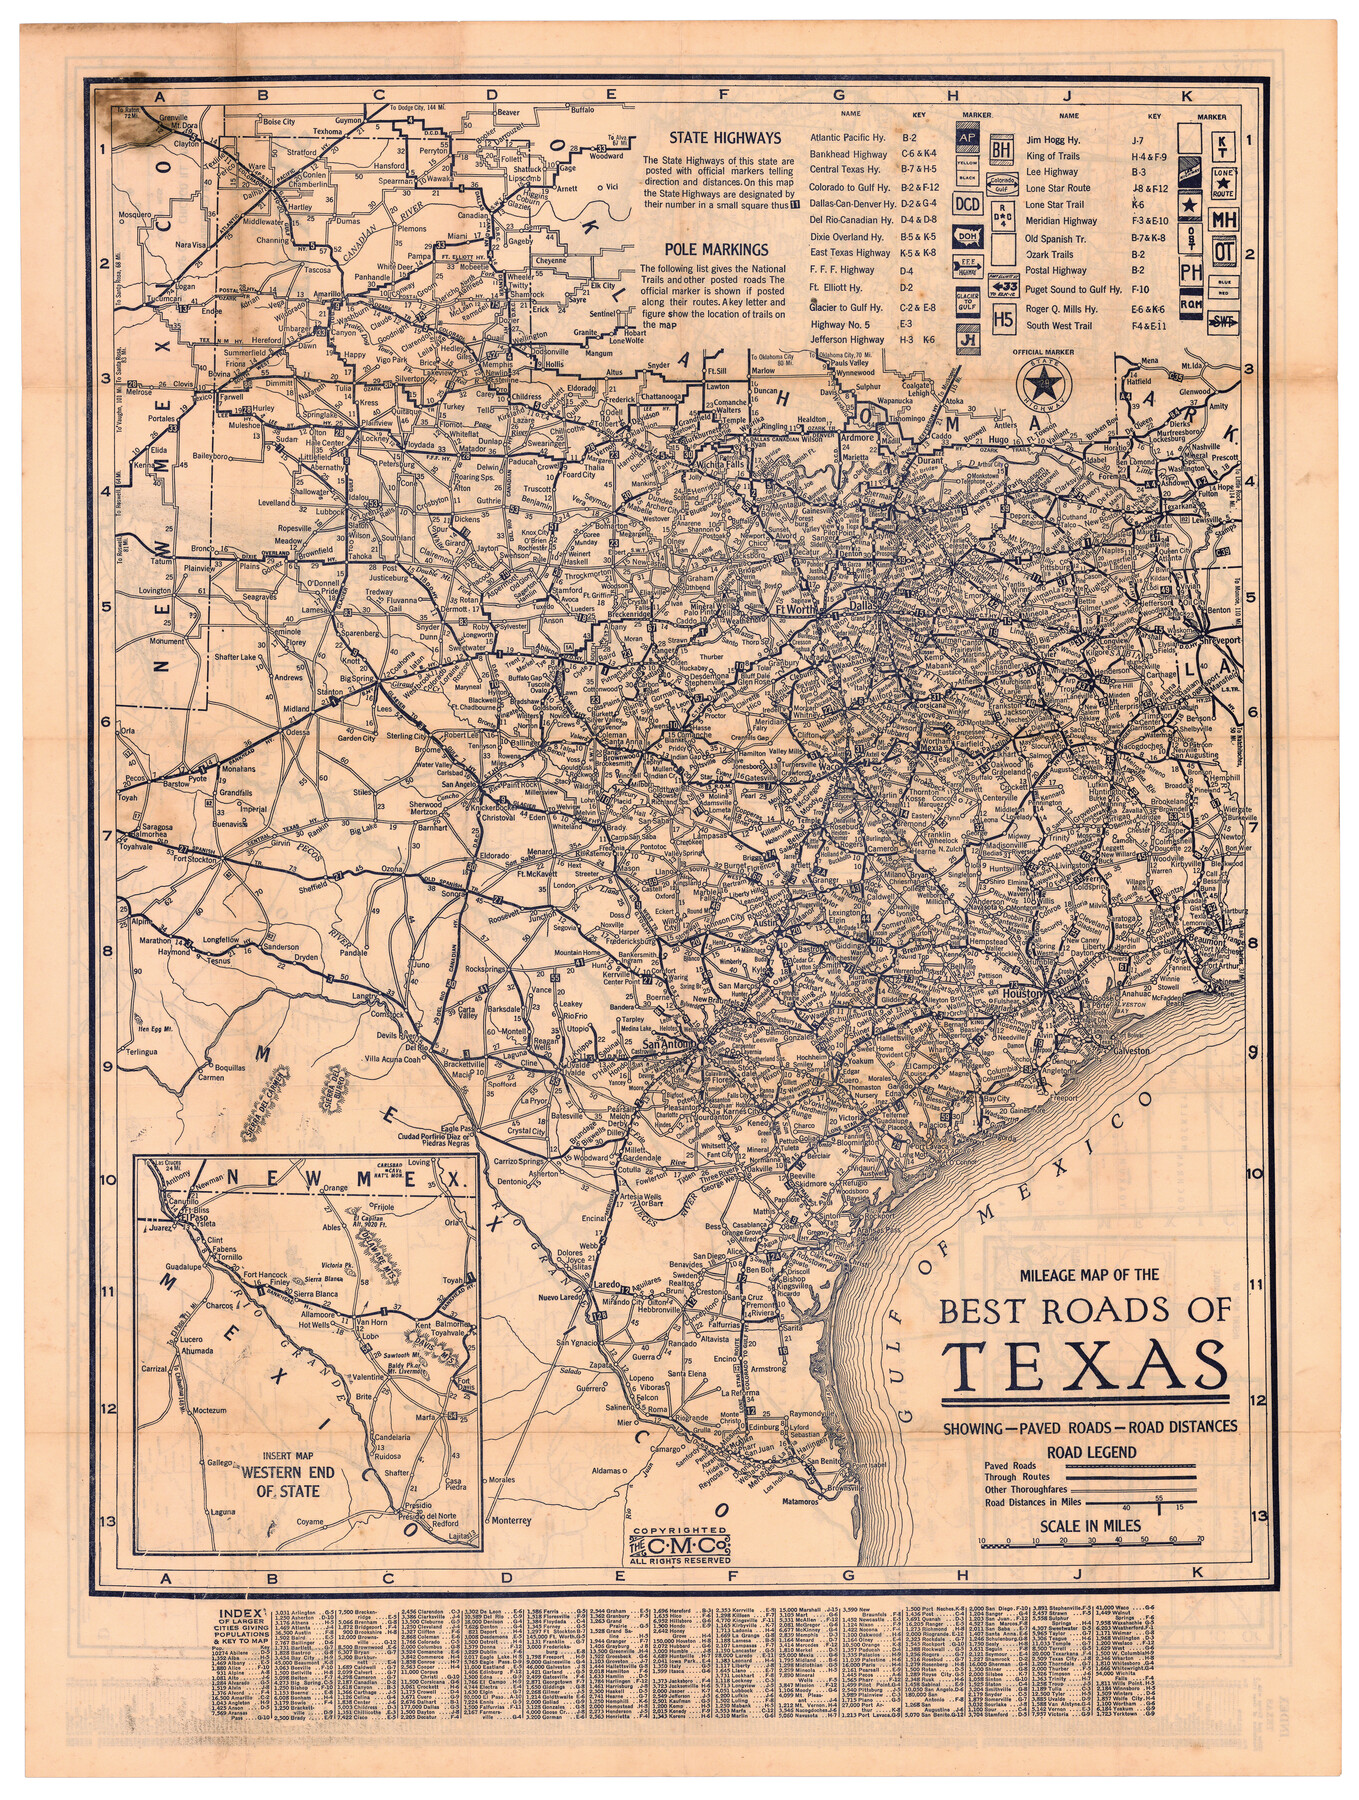 95894, Mileage Map of the Best Roads of Texas showing paved roads, road distances, Cobb Digital Map Collection - 1